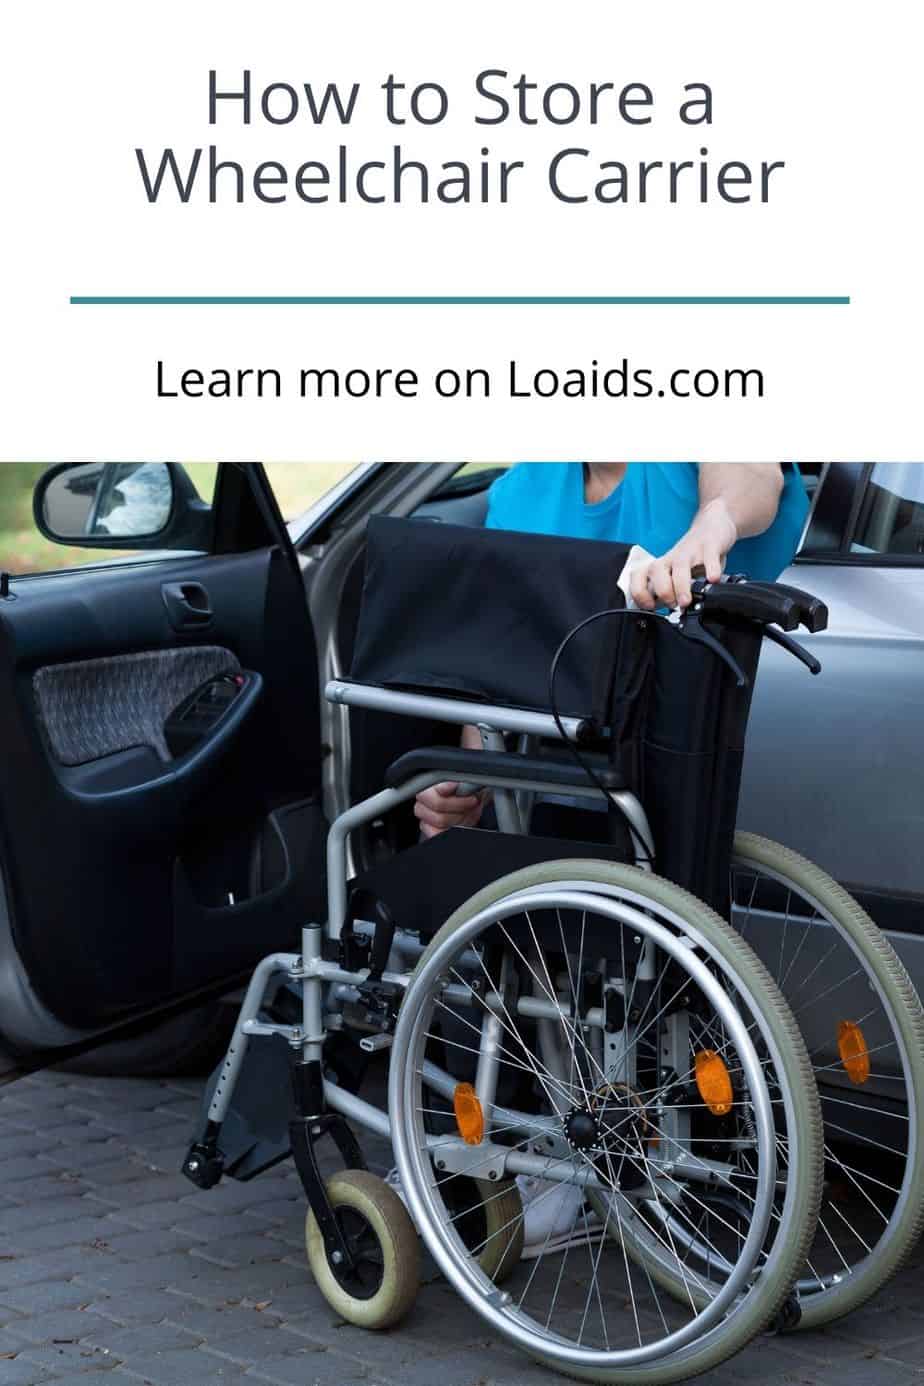 Knowing how to store a wheelchair carrier properly is a must to make sure that your wheelchair is safe during transit. Read on for more info and useful tips!